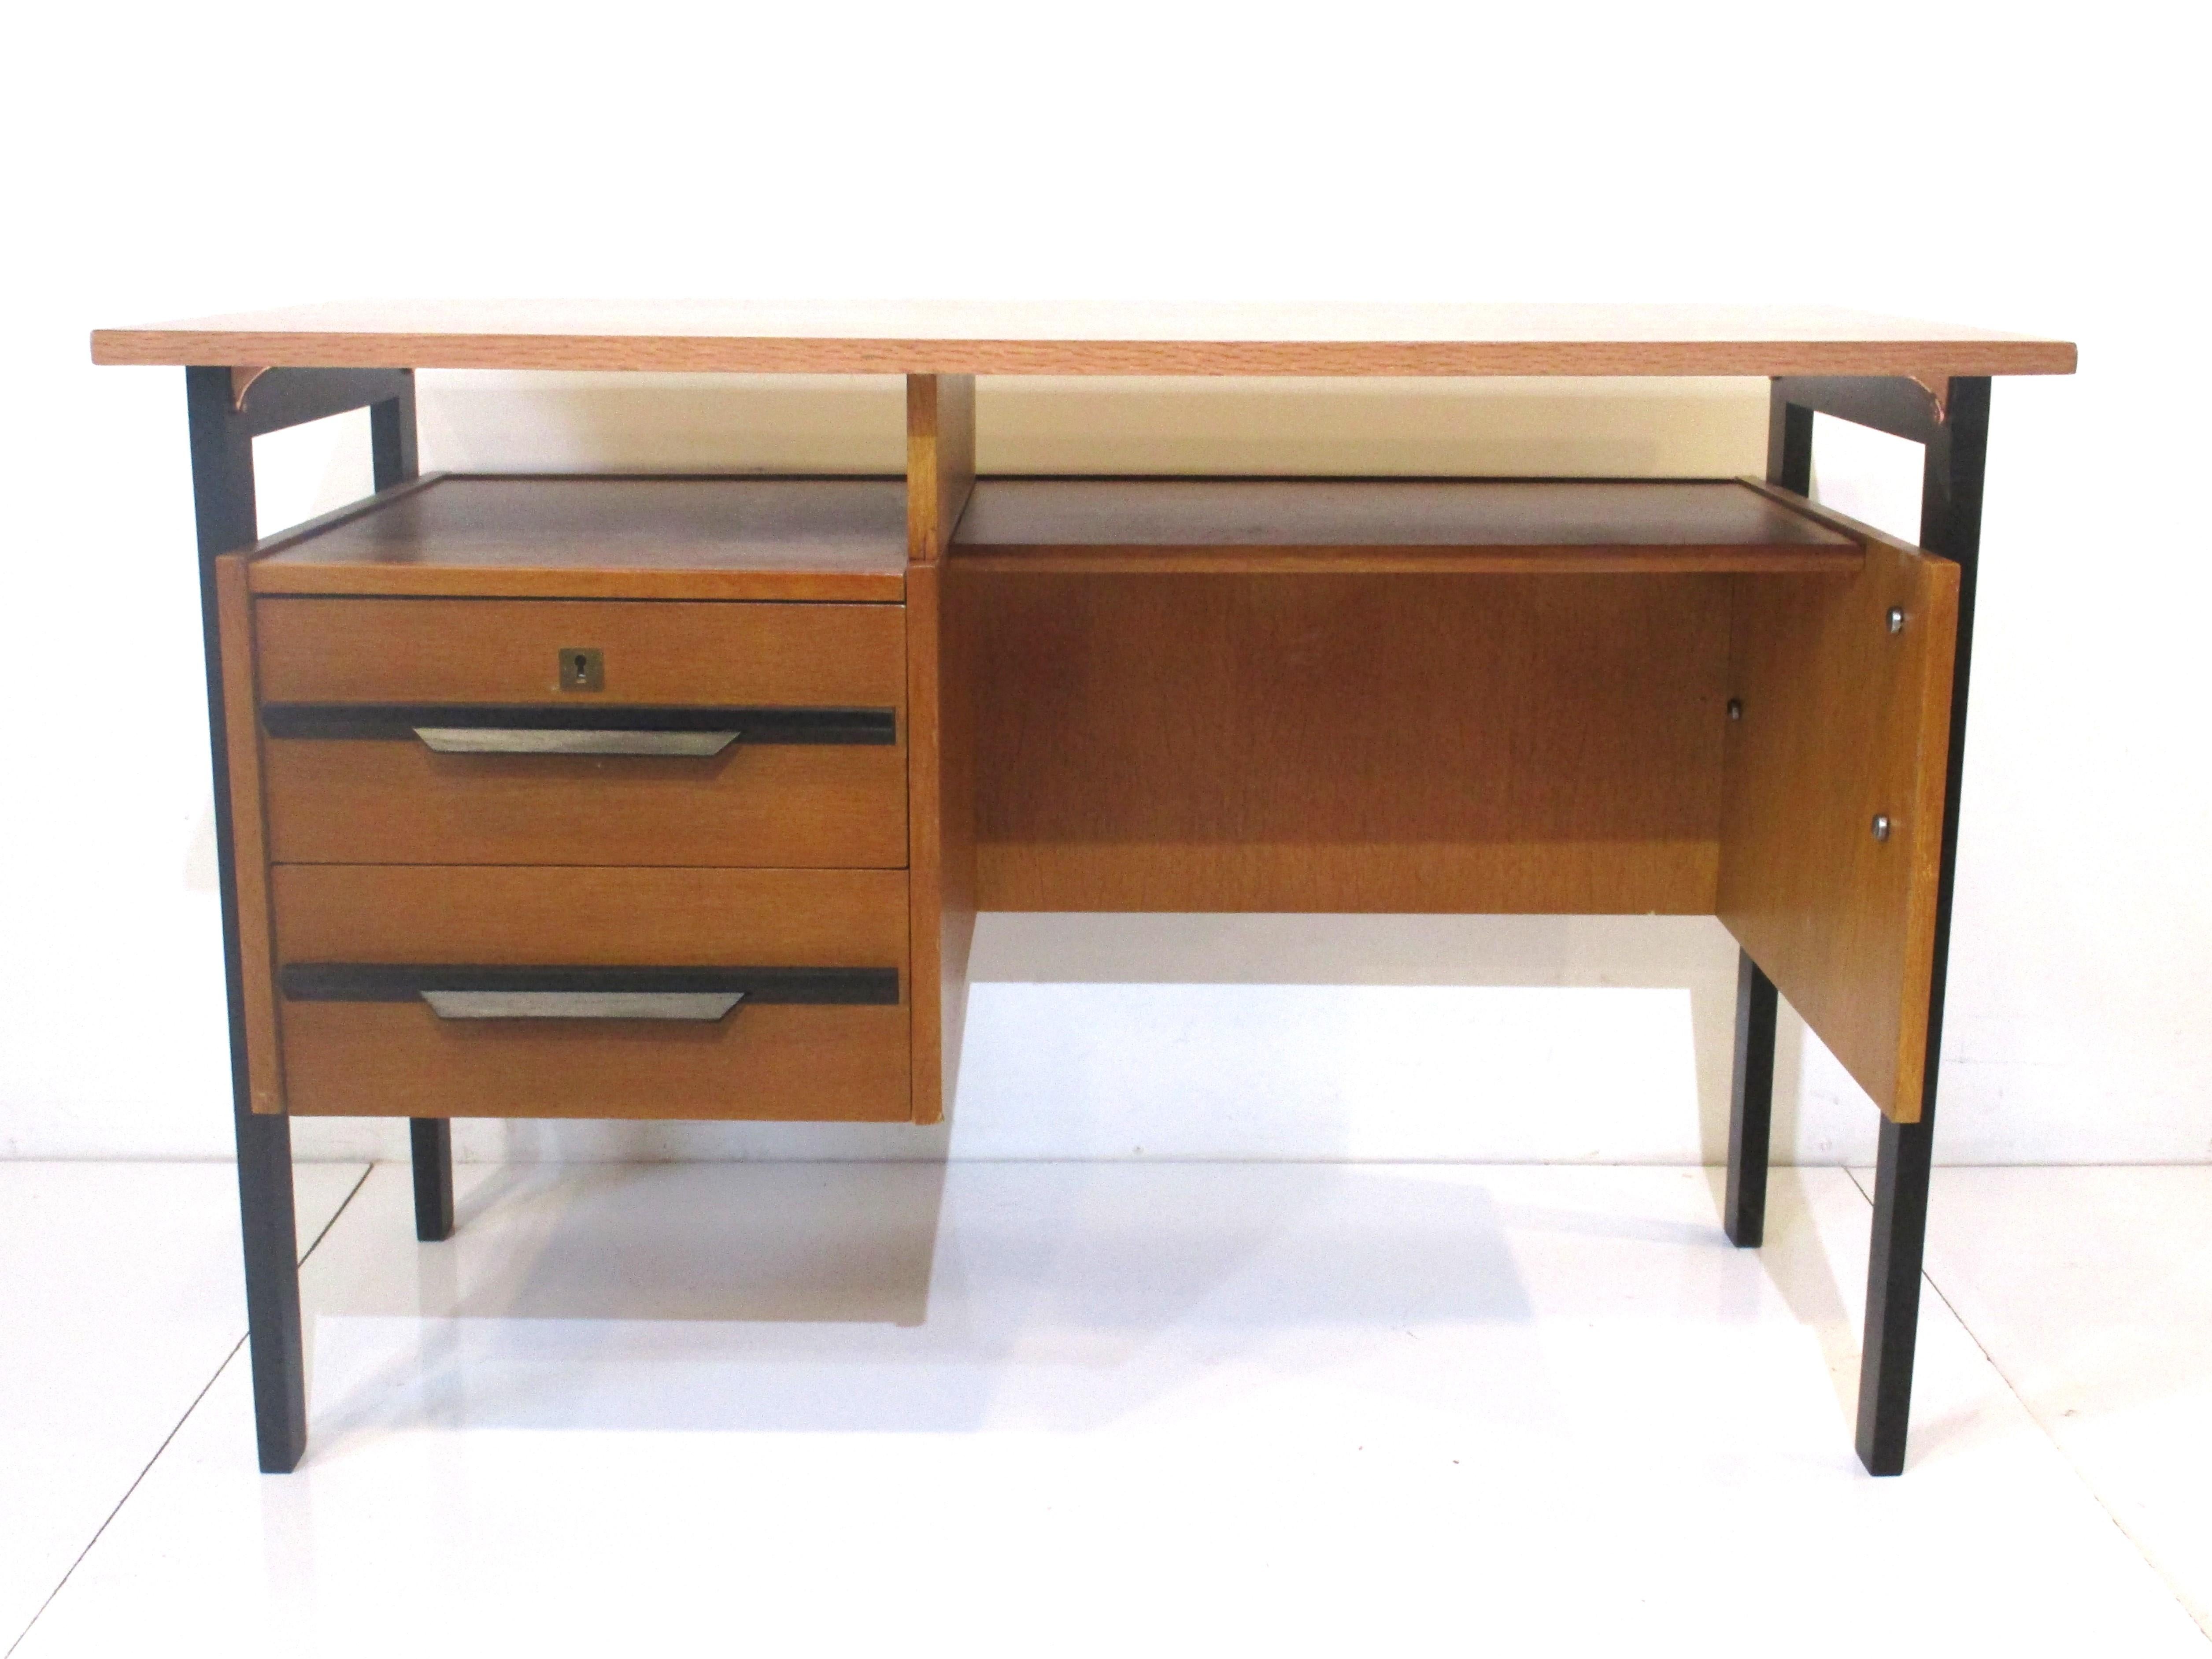 A very nice simple smaller sized writing desk with two drawers having bent wood handles and upper area storage shelve under the floating top . In the kneehole there's another set back storage area , the black contrasts with the honey colored wood of